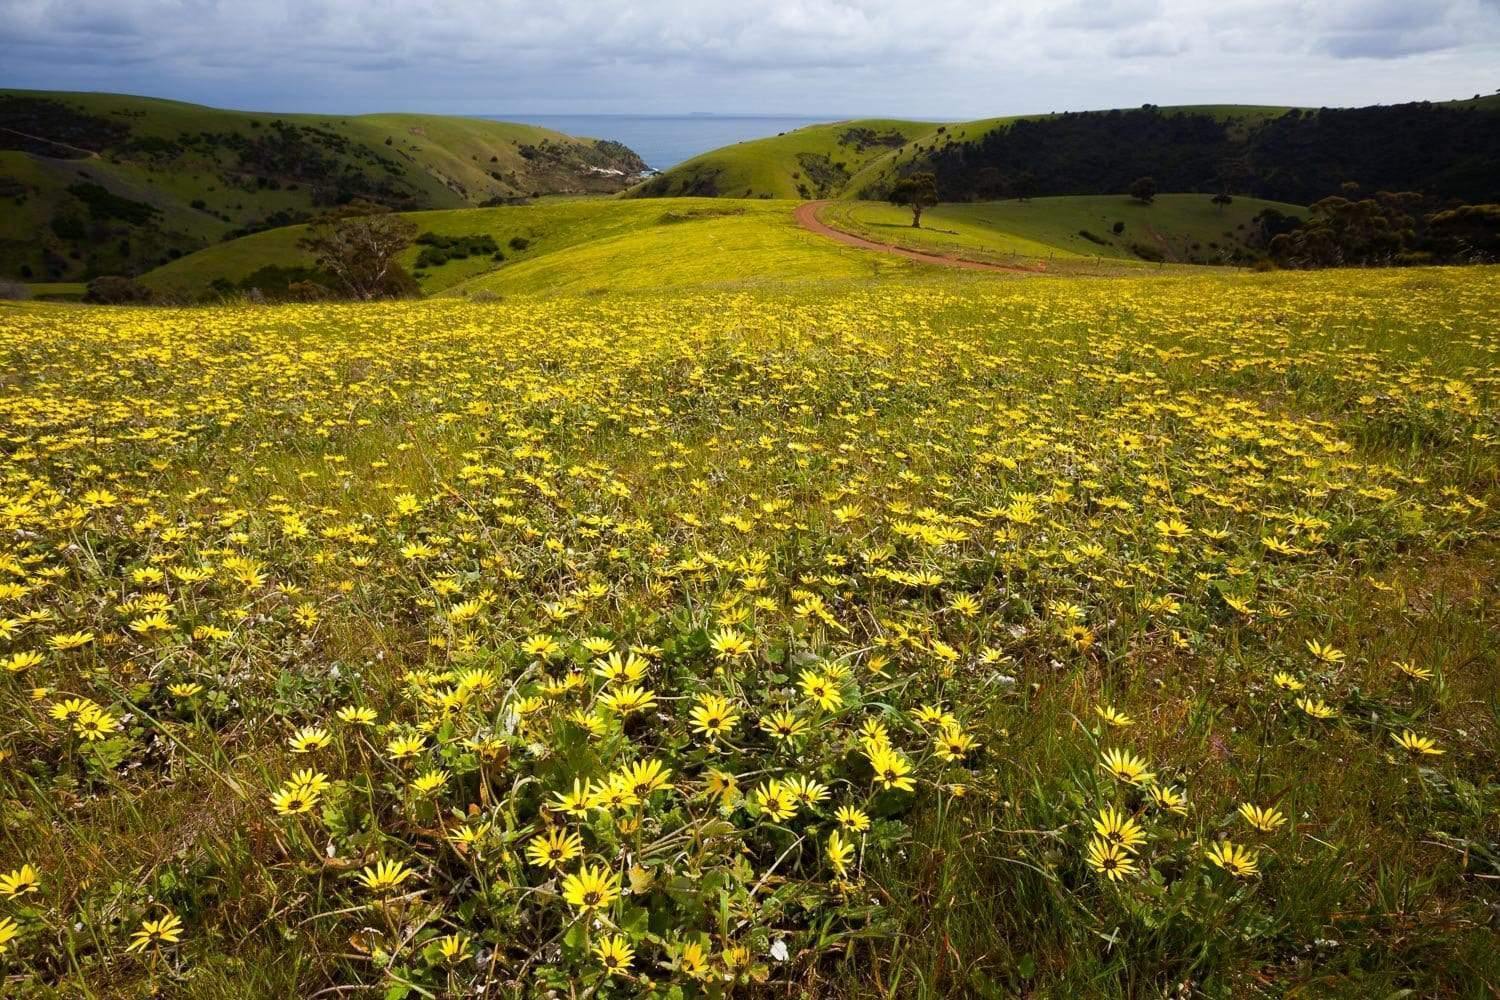 A green park with some yellow flowers on the ground, Spring Flowers - Kangaroo Island SA